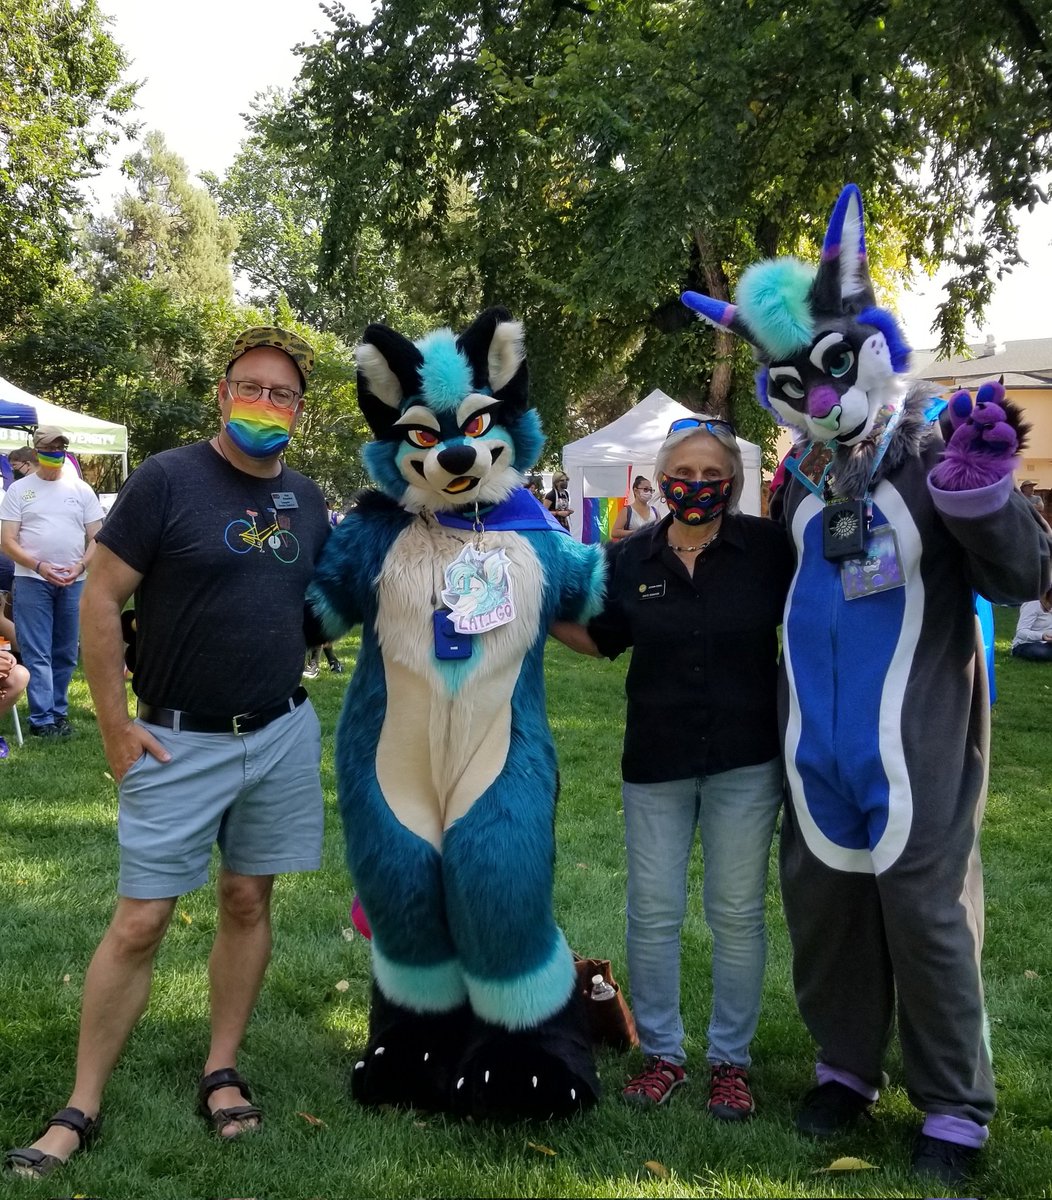 Enjoying the fabulous #NoCoPride in #FtCollins!  Hanging out with my friends Sen. Joann Ginal @COSenDem & @choccy__mousse & @VenomSnowFloof.
#coleg #copolitics @Denverite @DenverWestword #LGBTQ #TransRightsAreHumanRights #PrideFest